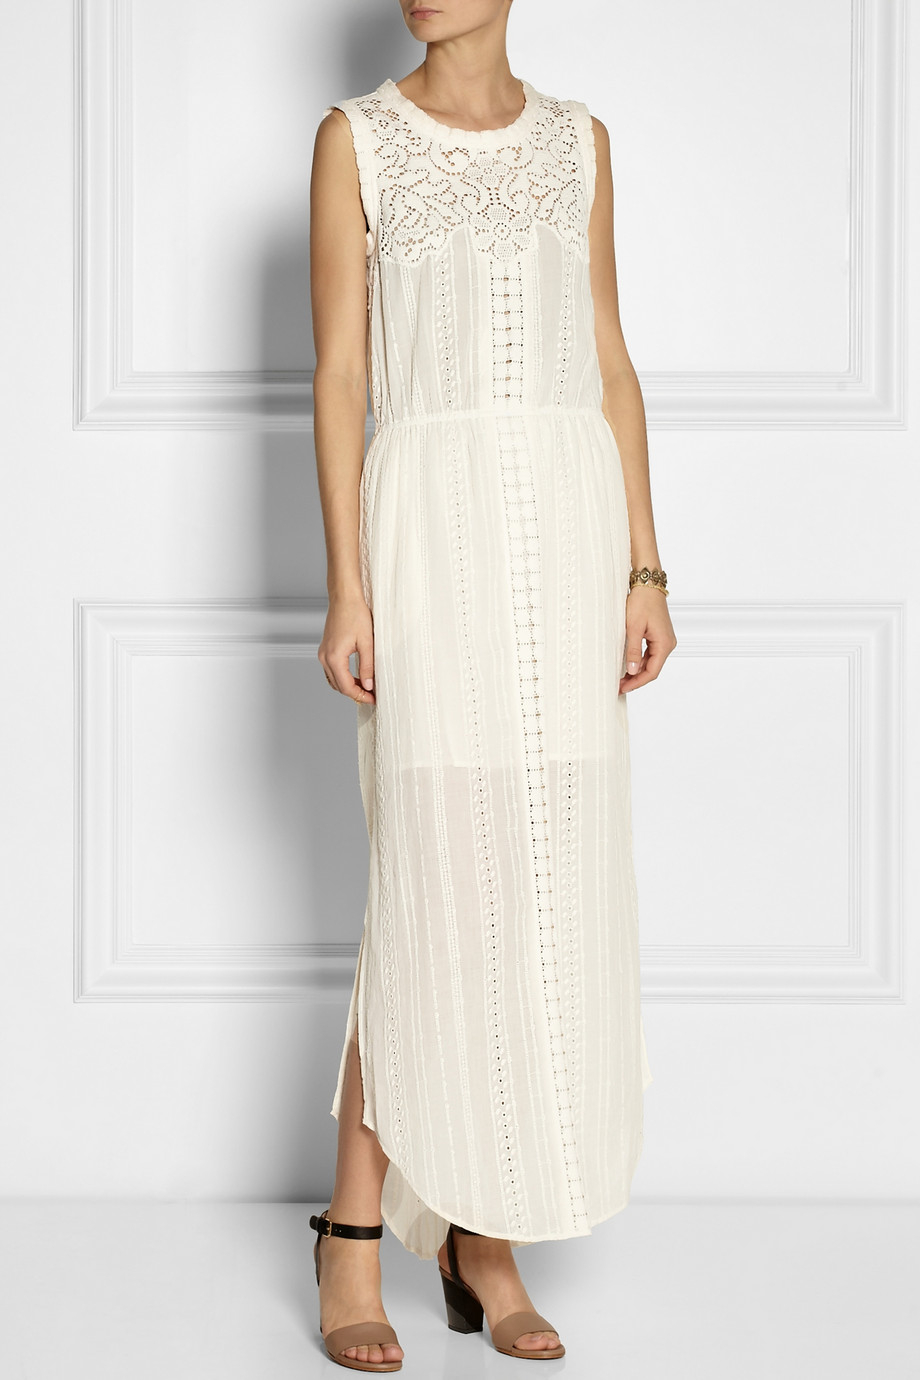 Lyst - Sea Lacepaneled Broderie Anglaise Cotton Maxi Dress in White